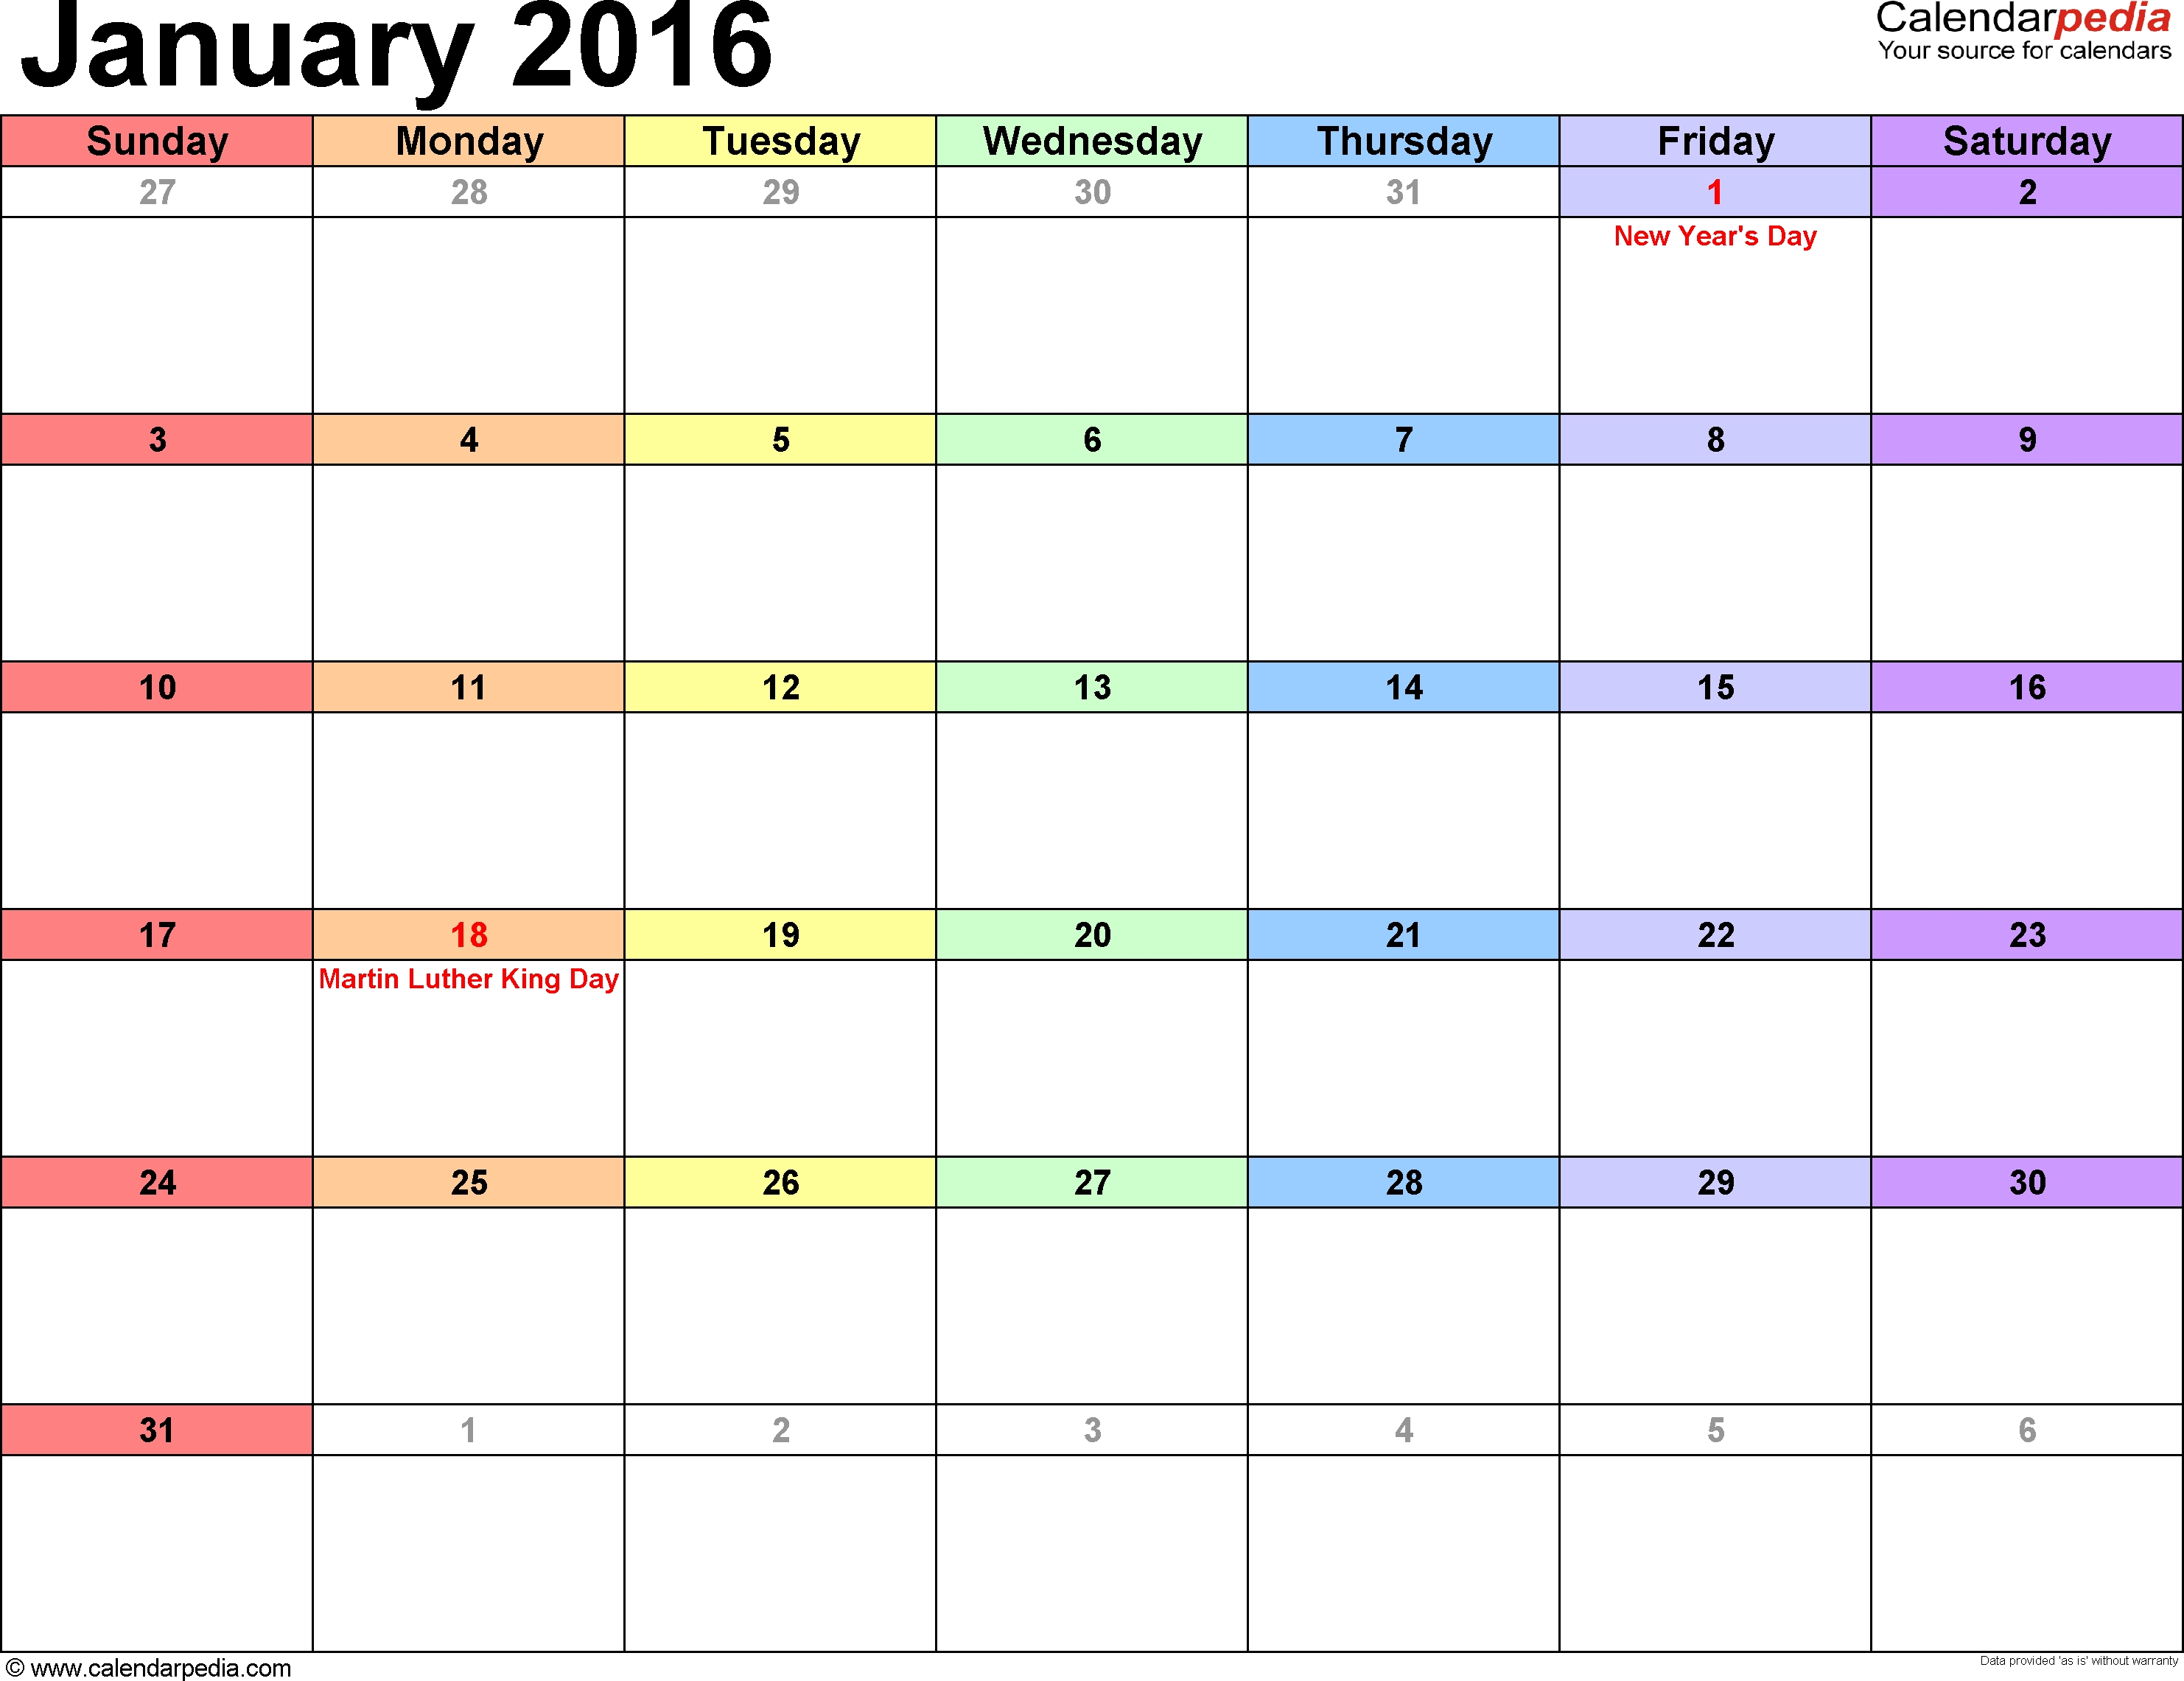 January 2016 Calendars For Word, Excel &amp; Pdf  Calendar Images From Jan To Dec